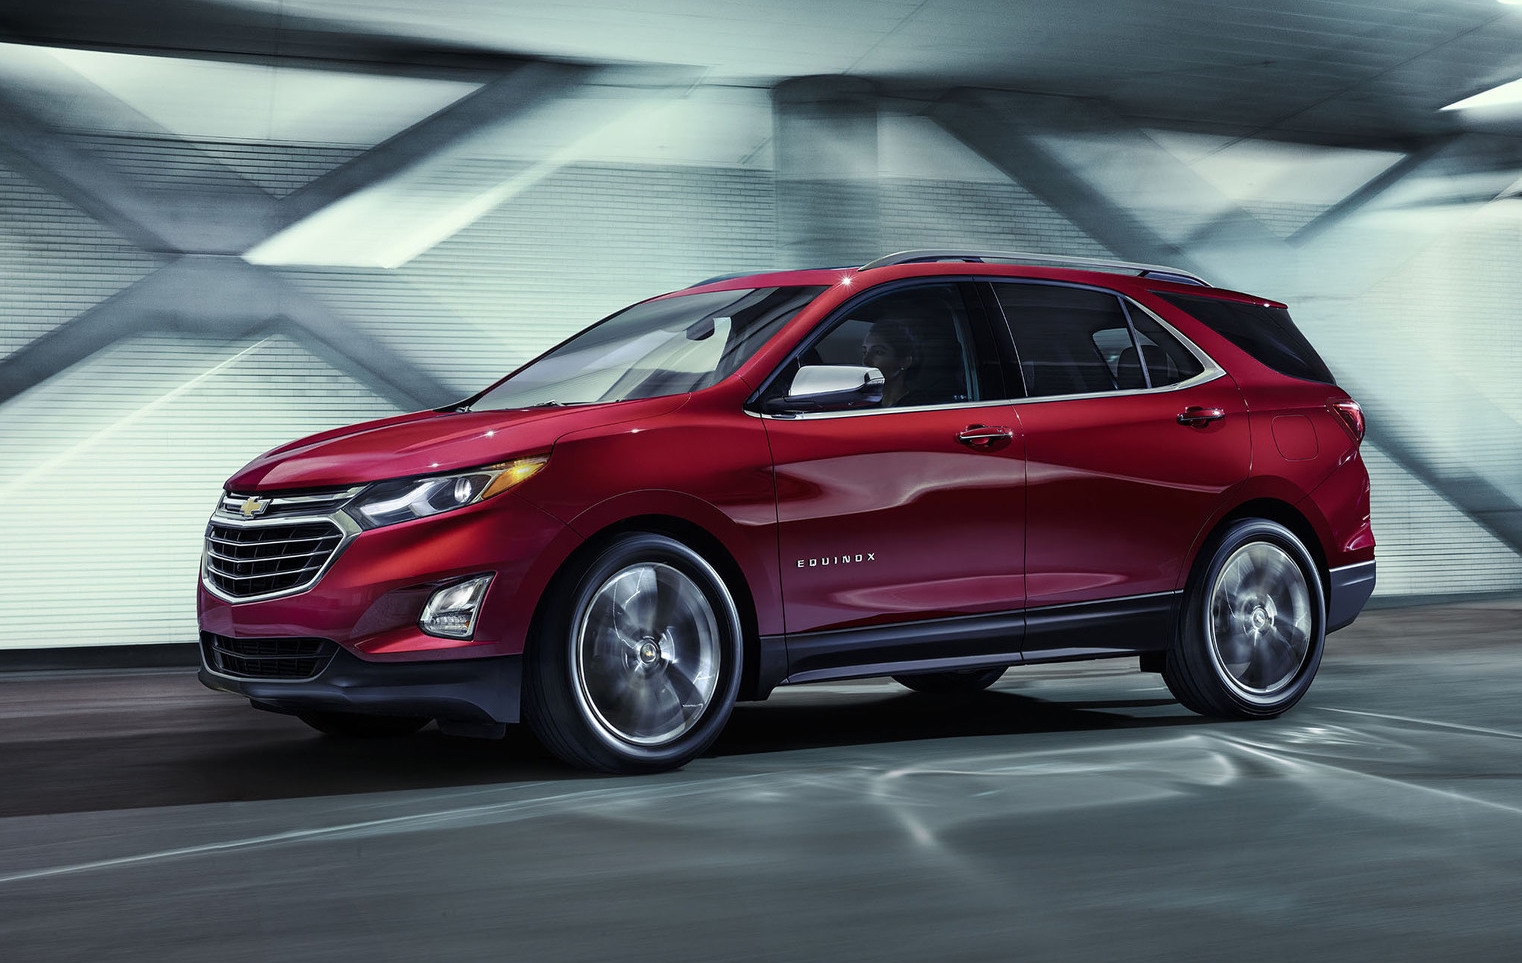 2018 Chevrolet Equinox revealed, to become 2017 Holden SUV